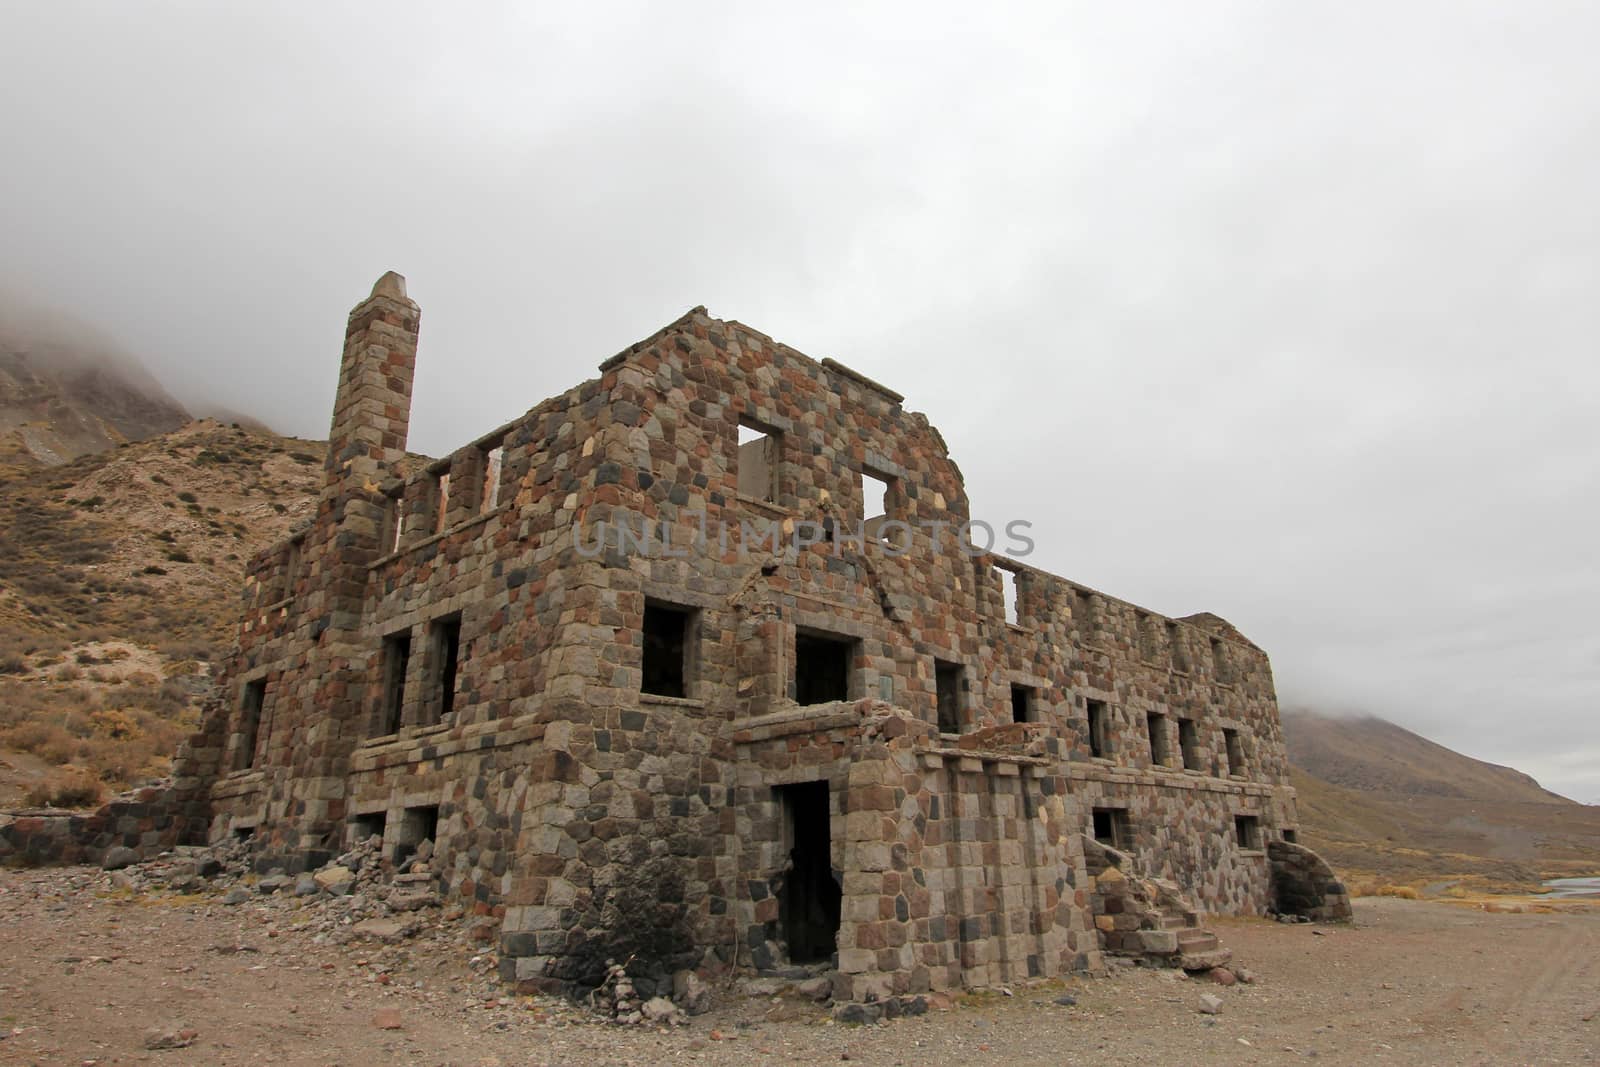 Abandoned Sosneado Hot Springs Hotel that has supposedly been a nazi hideout, Mendoza, Argentina